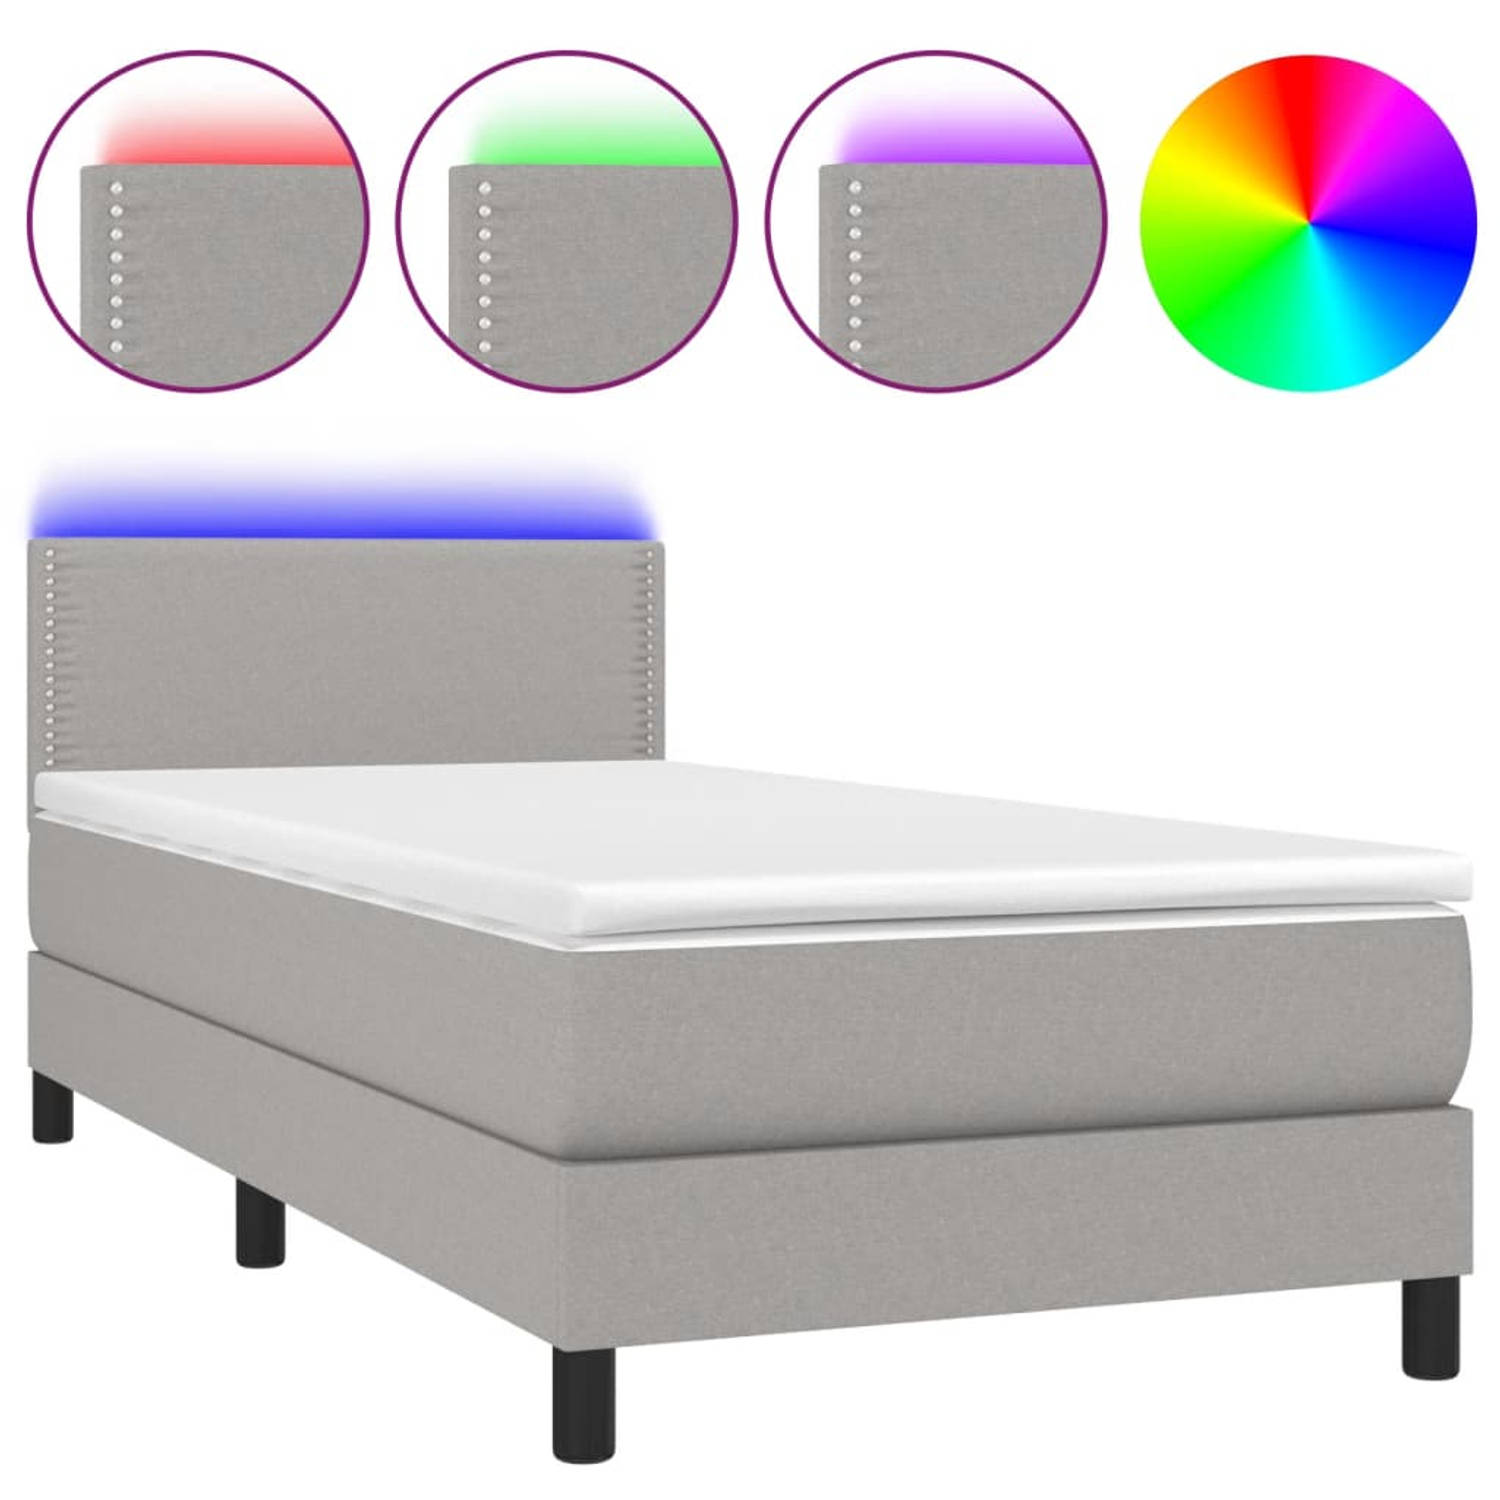 The Living Store Boxspring met matras en LED stof lichtgrijs 80x200 cm - Boxspring - Boxsprings - Bed - Slaapmeubel - Boxspringbed - Boxspring Bed - Tweepersoonsbed - Bed Met Matra